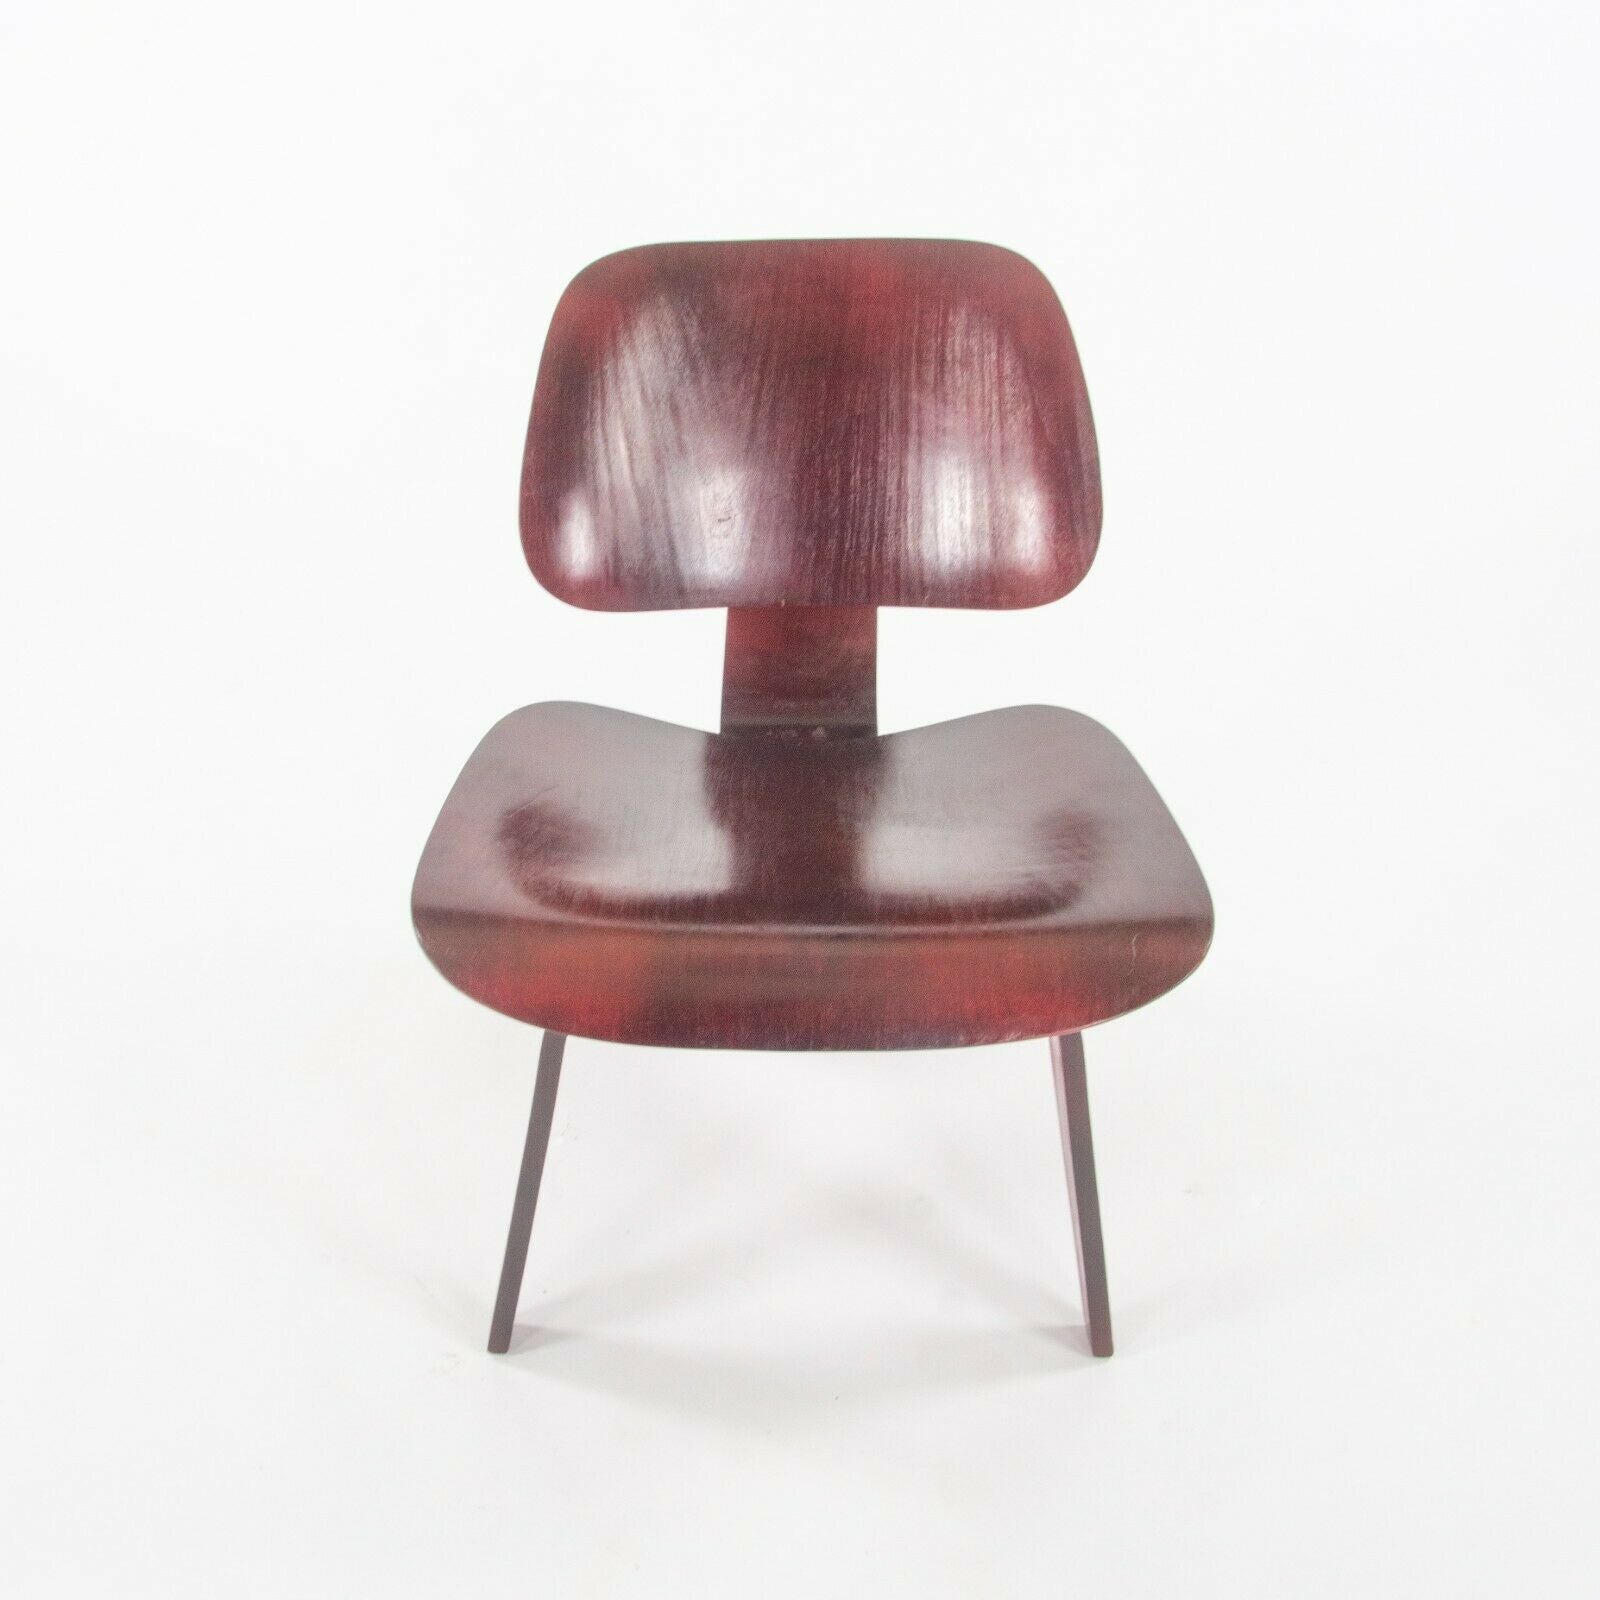 SOLD 1954 Herman Miller Eames LCW Lounge Chair Wood Refinished Red Aniline with Label